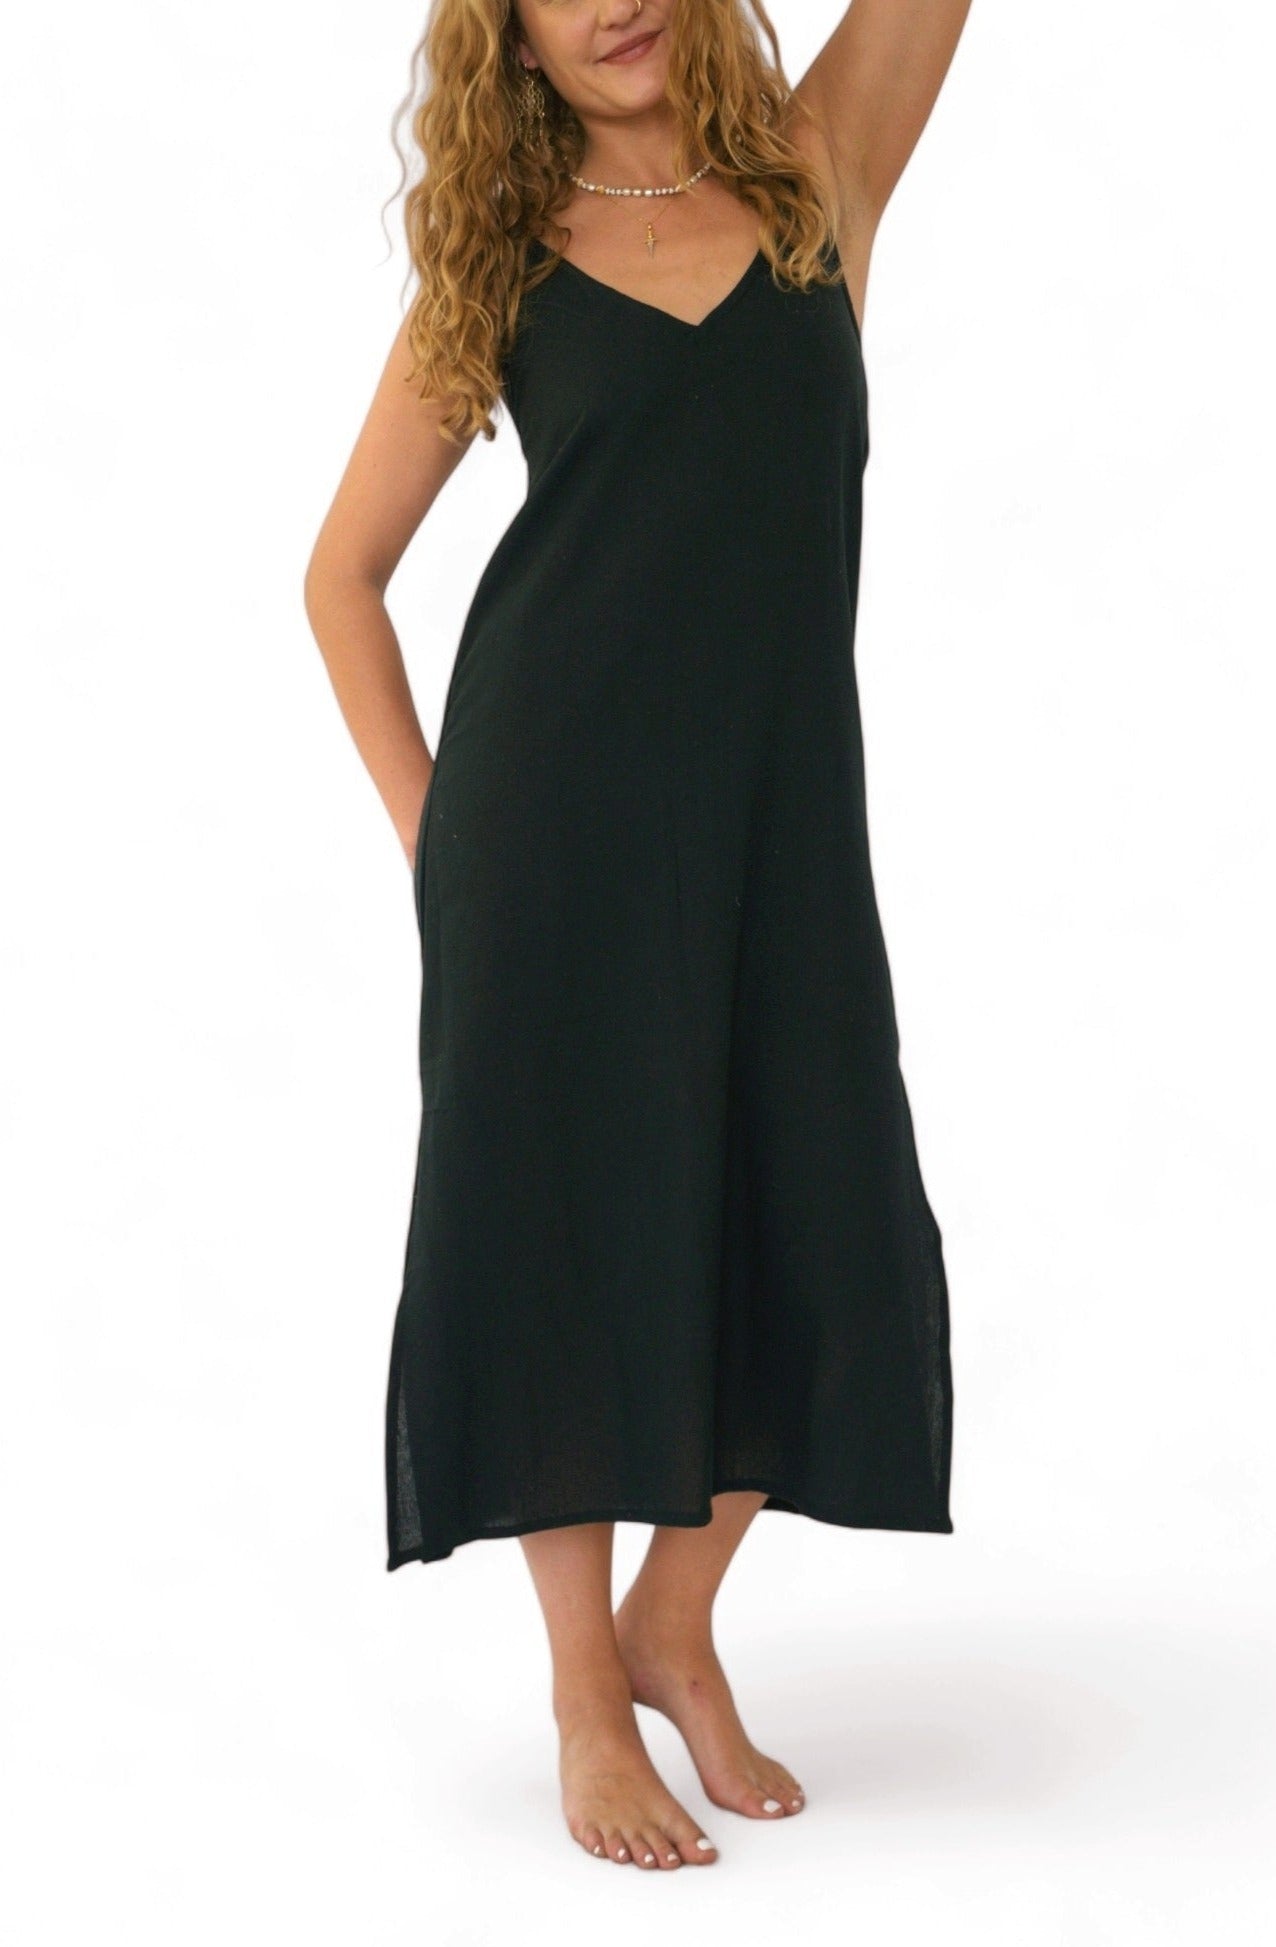 Organic Cotton Natural Dyed Black Dress - One Size